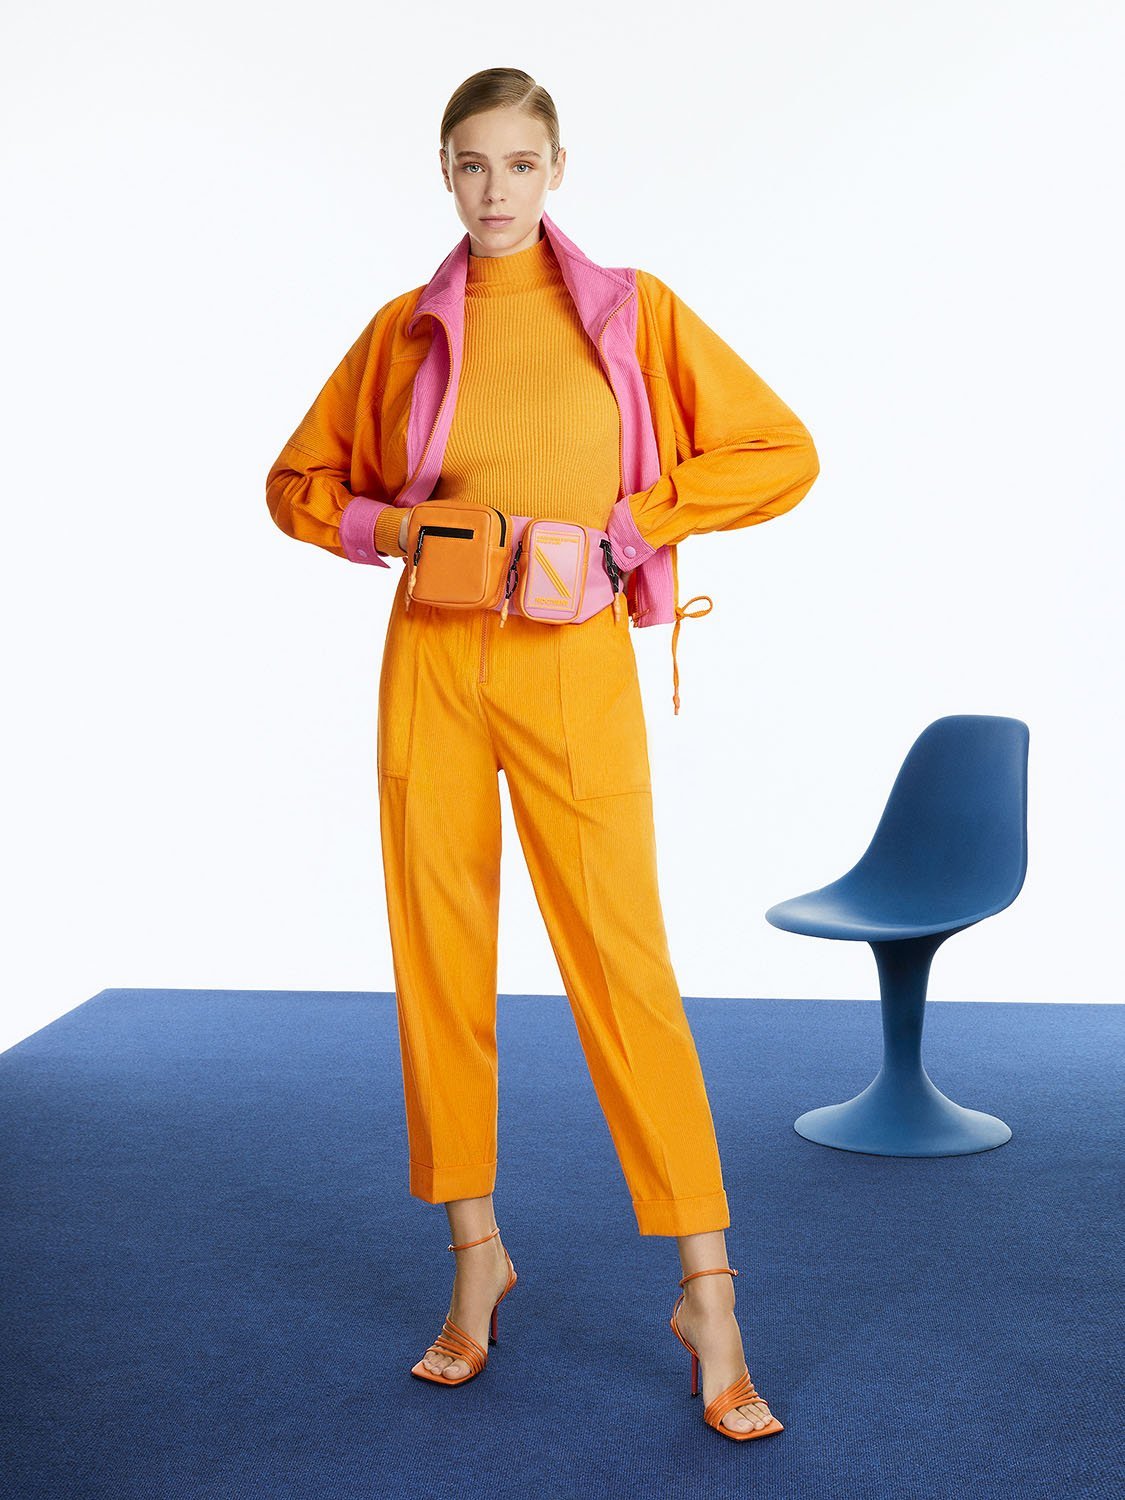 High Collar Orange Bomber Jacket for Women - BeExtra! Apparel & More